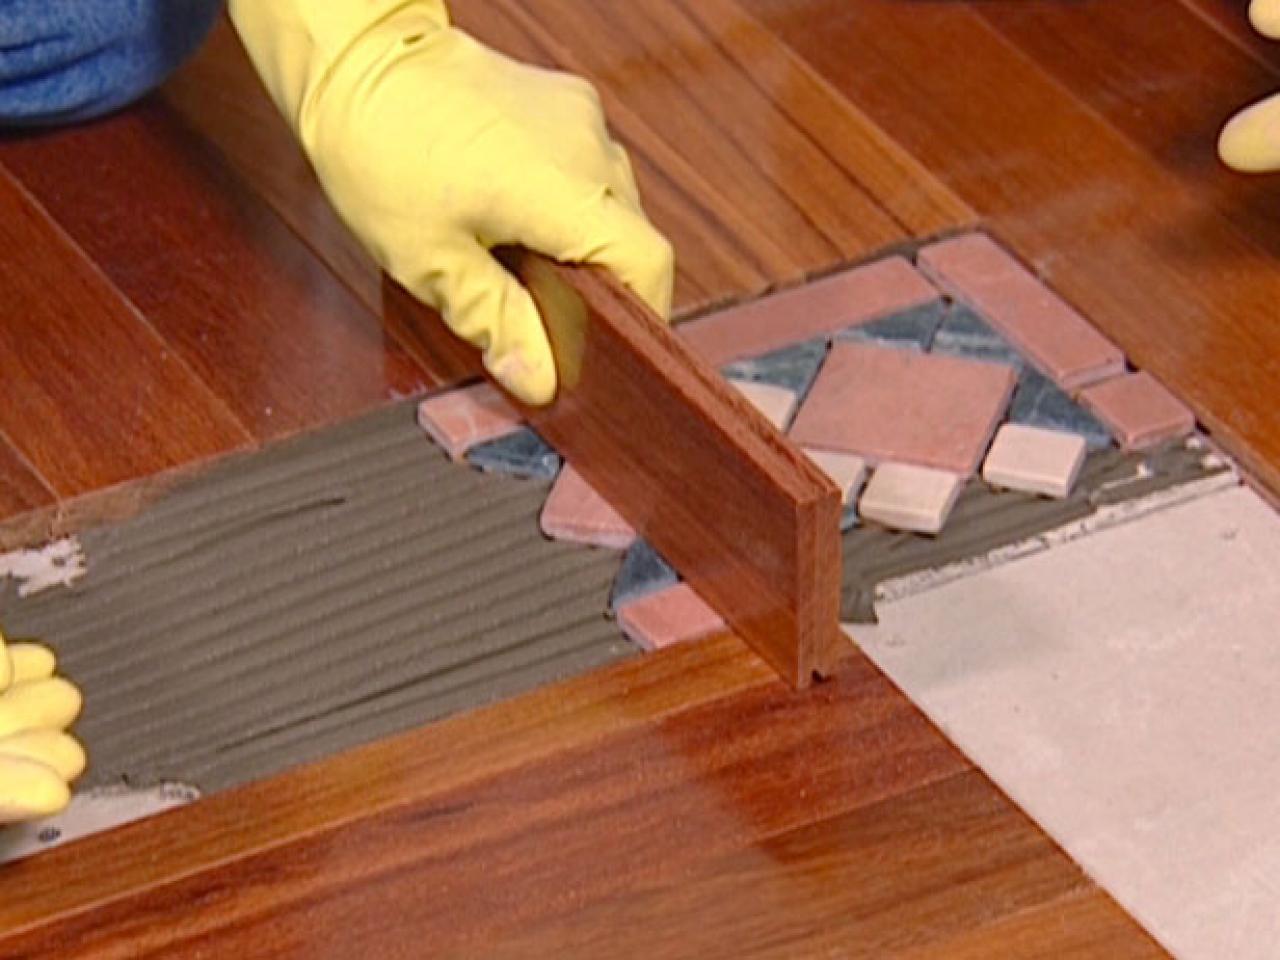 How To Install A Mixed Media Floor, Tile And Hardwood Floor Combinations